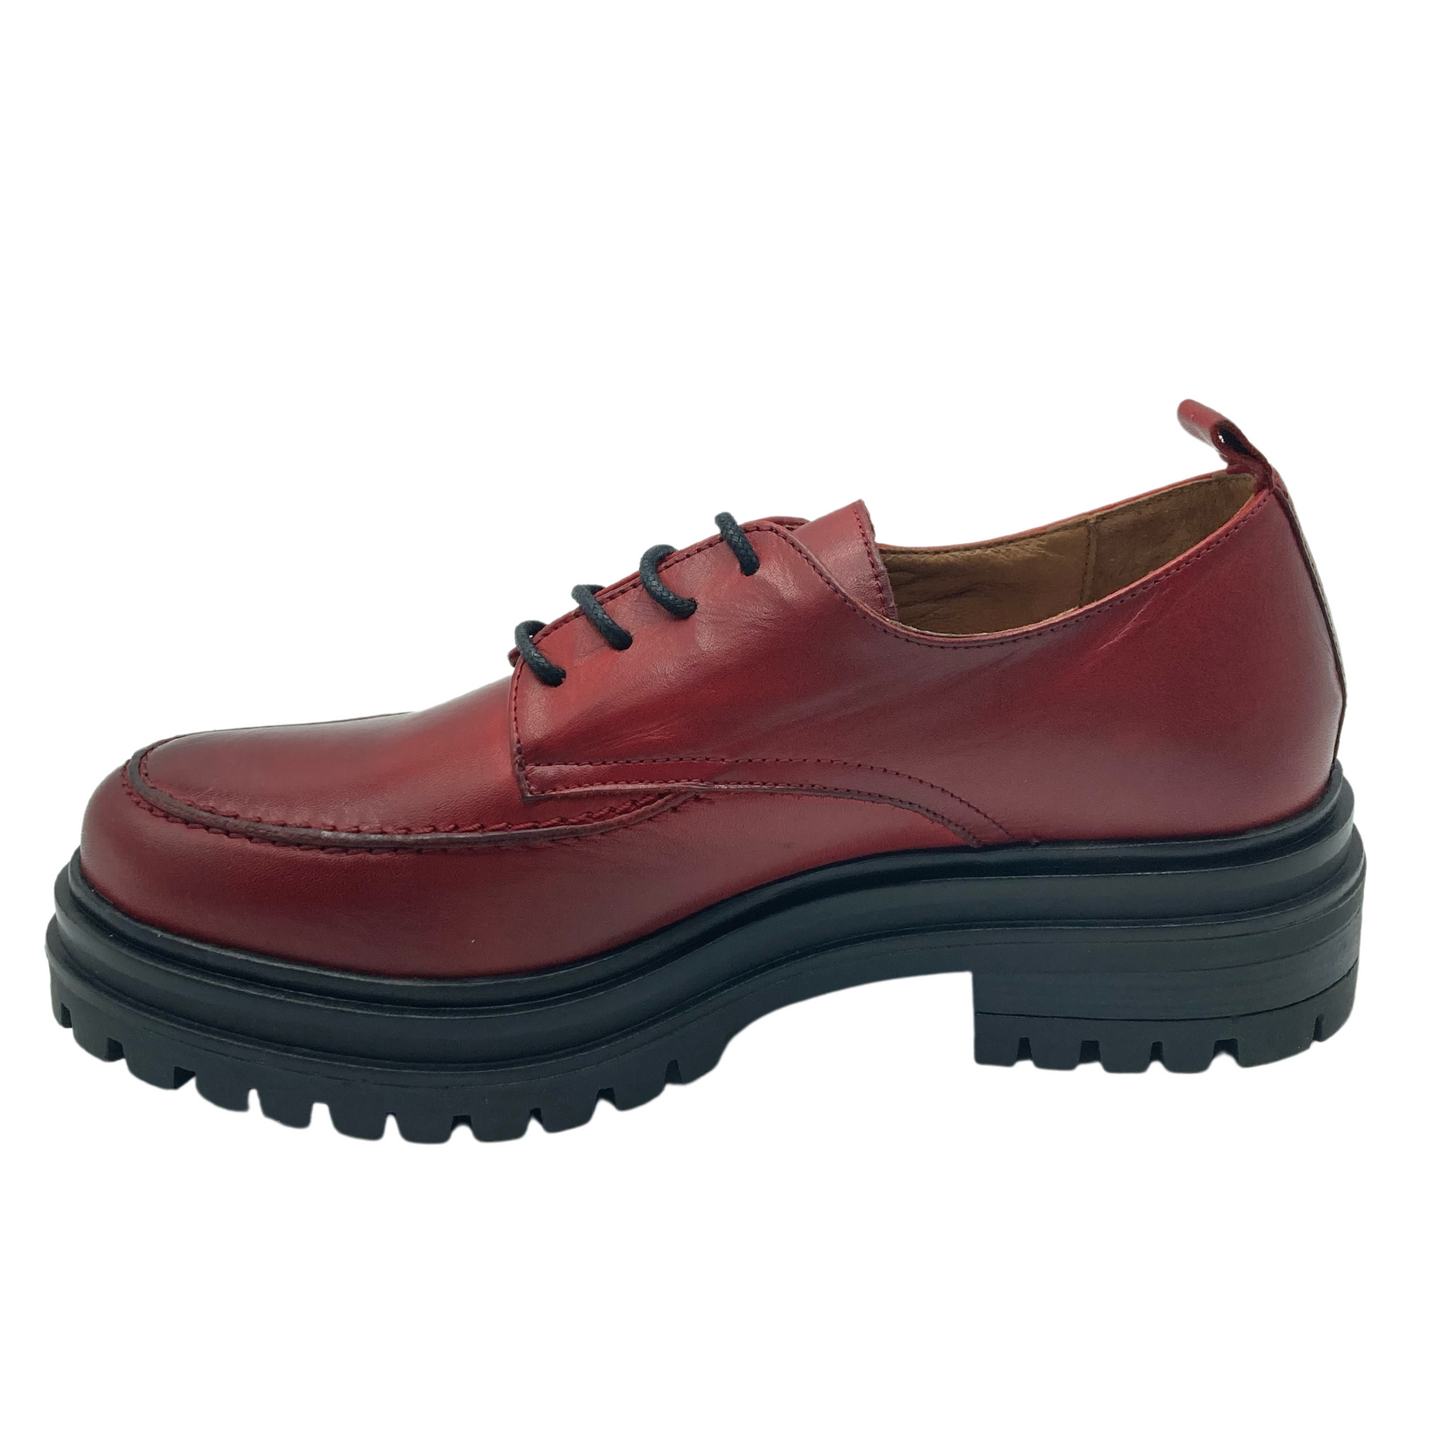 Left facing view of red leather loafer with skinny black laces, heel pull-on tab and chunky black sole